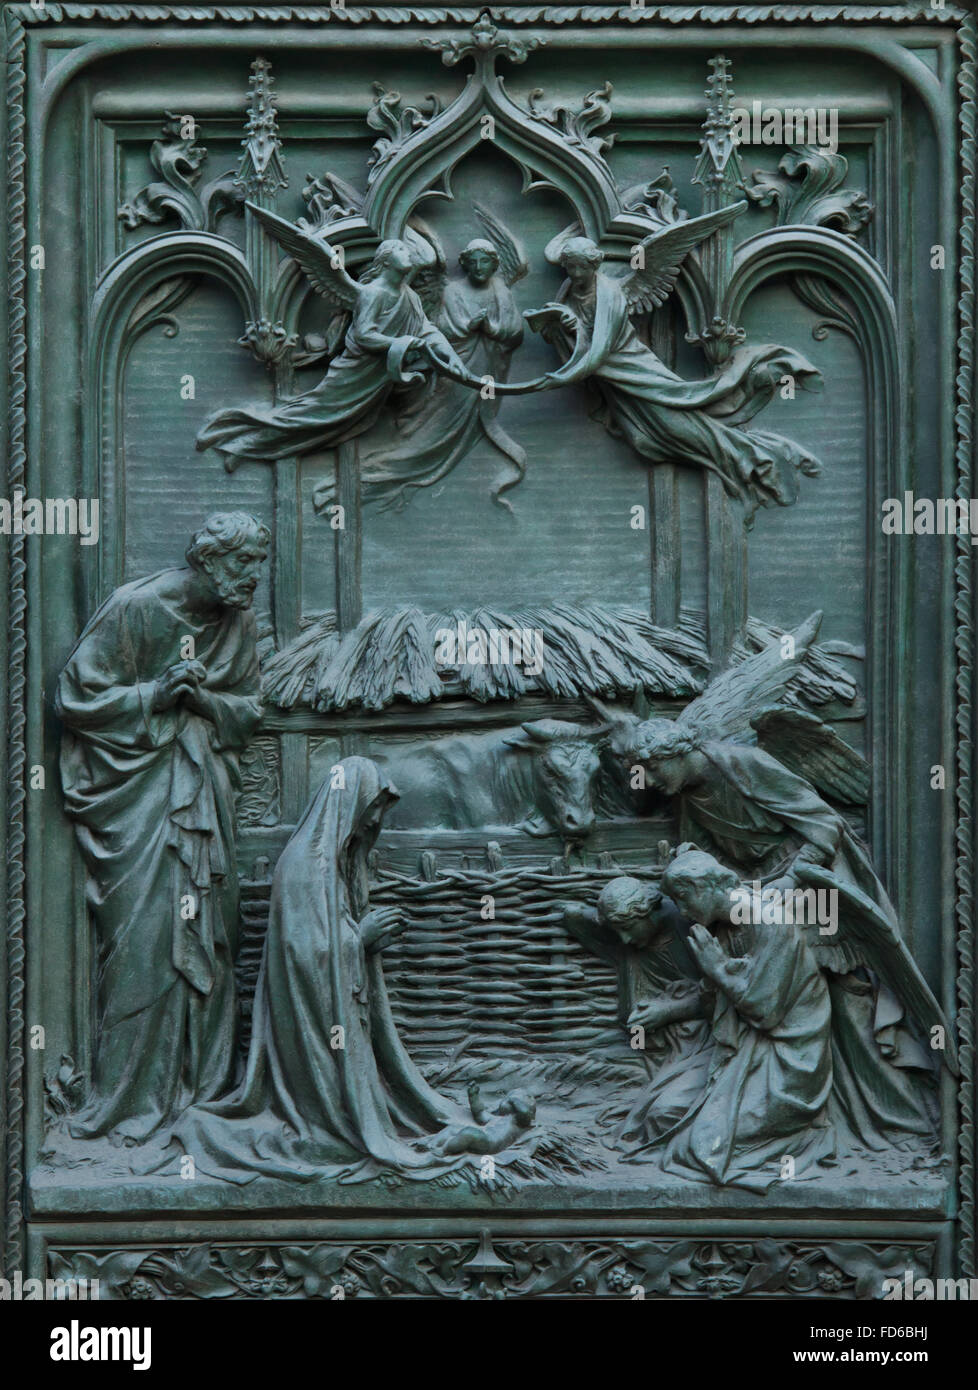 Nativity of Jesus. Detail of the main bronze door of the Milan Cathedral (Duomo di Milano) in Milan, Italy. The bronze door was designed by Italian sculptor Ludovico Pogliaghi in 1894-1908. Stock Photo